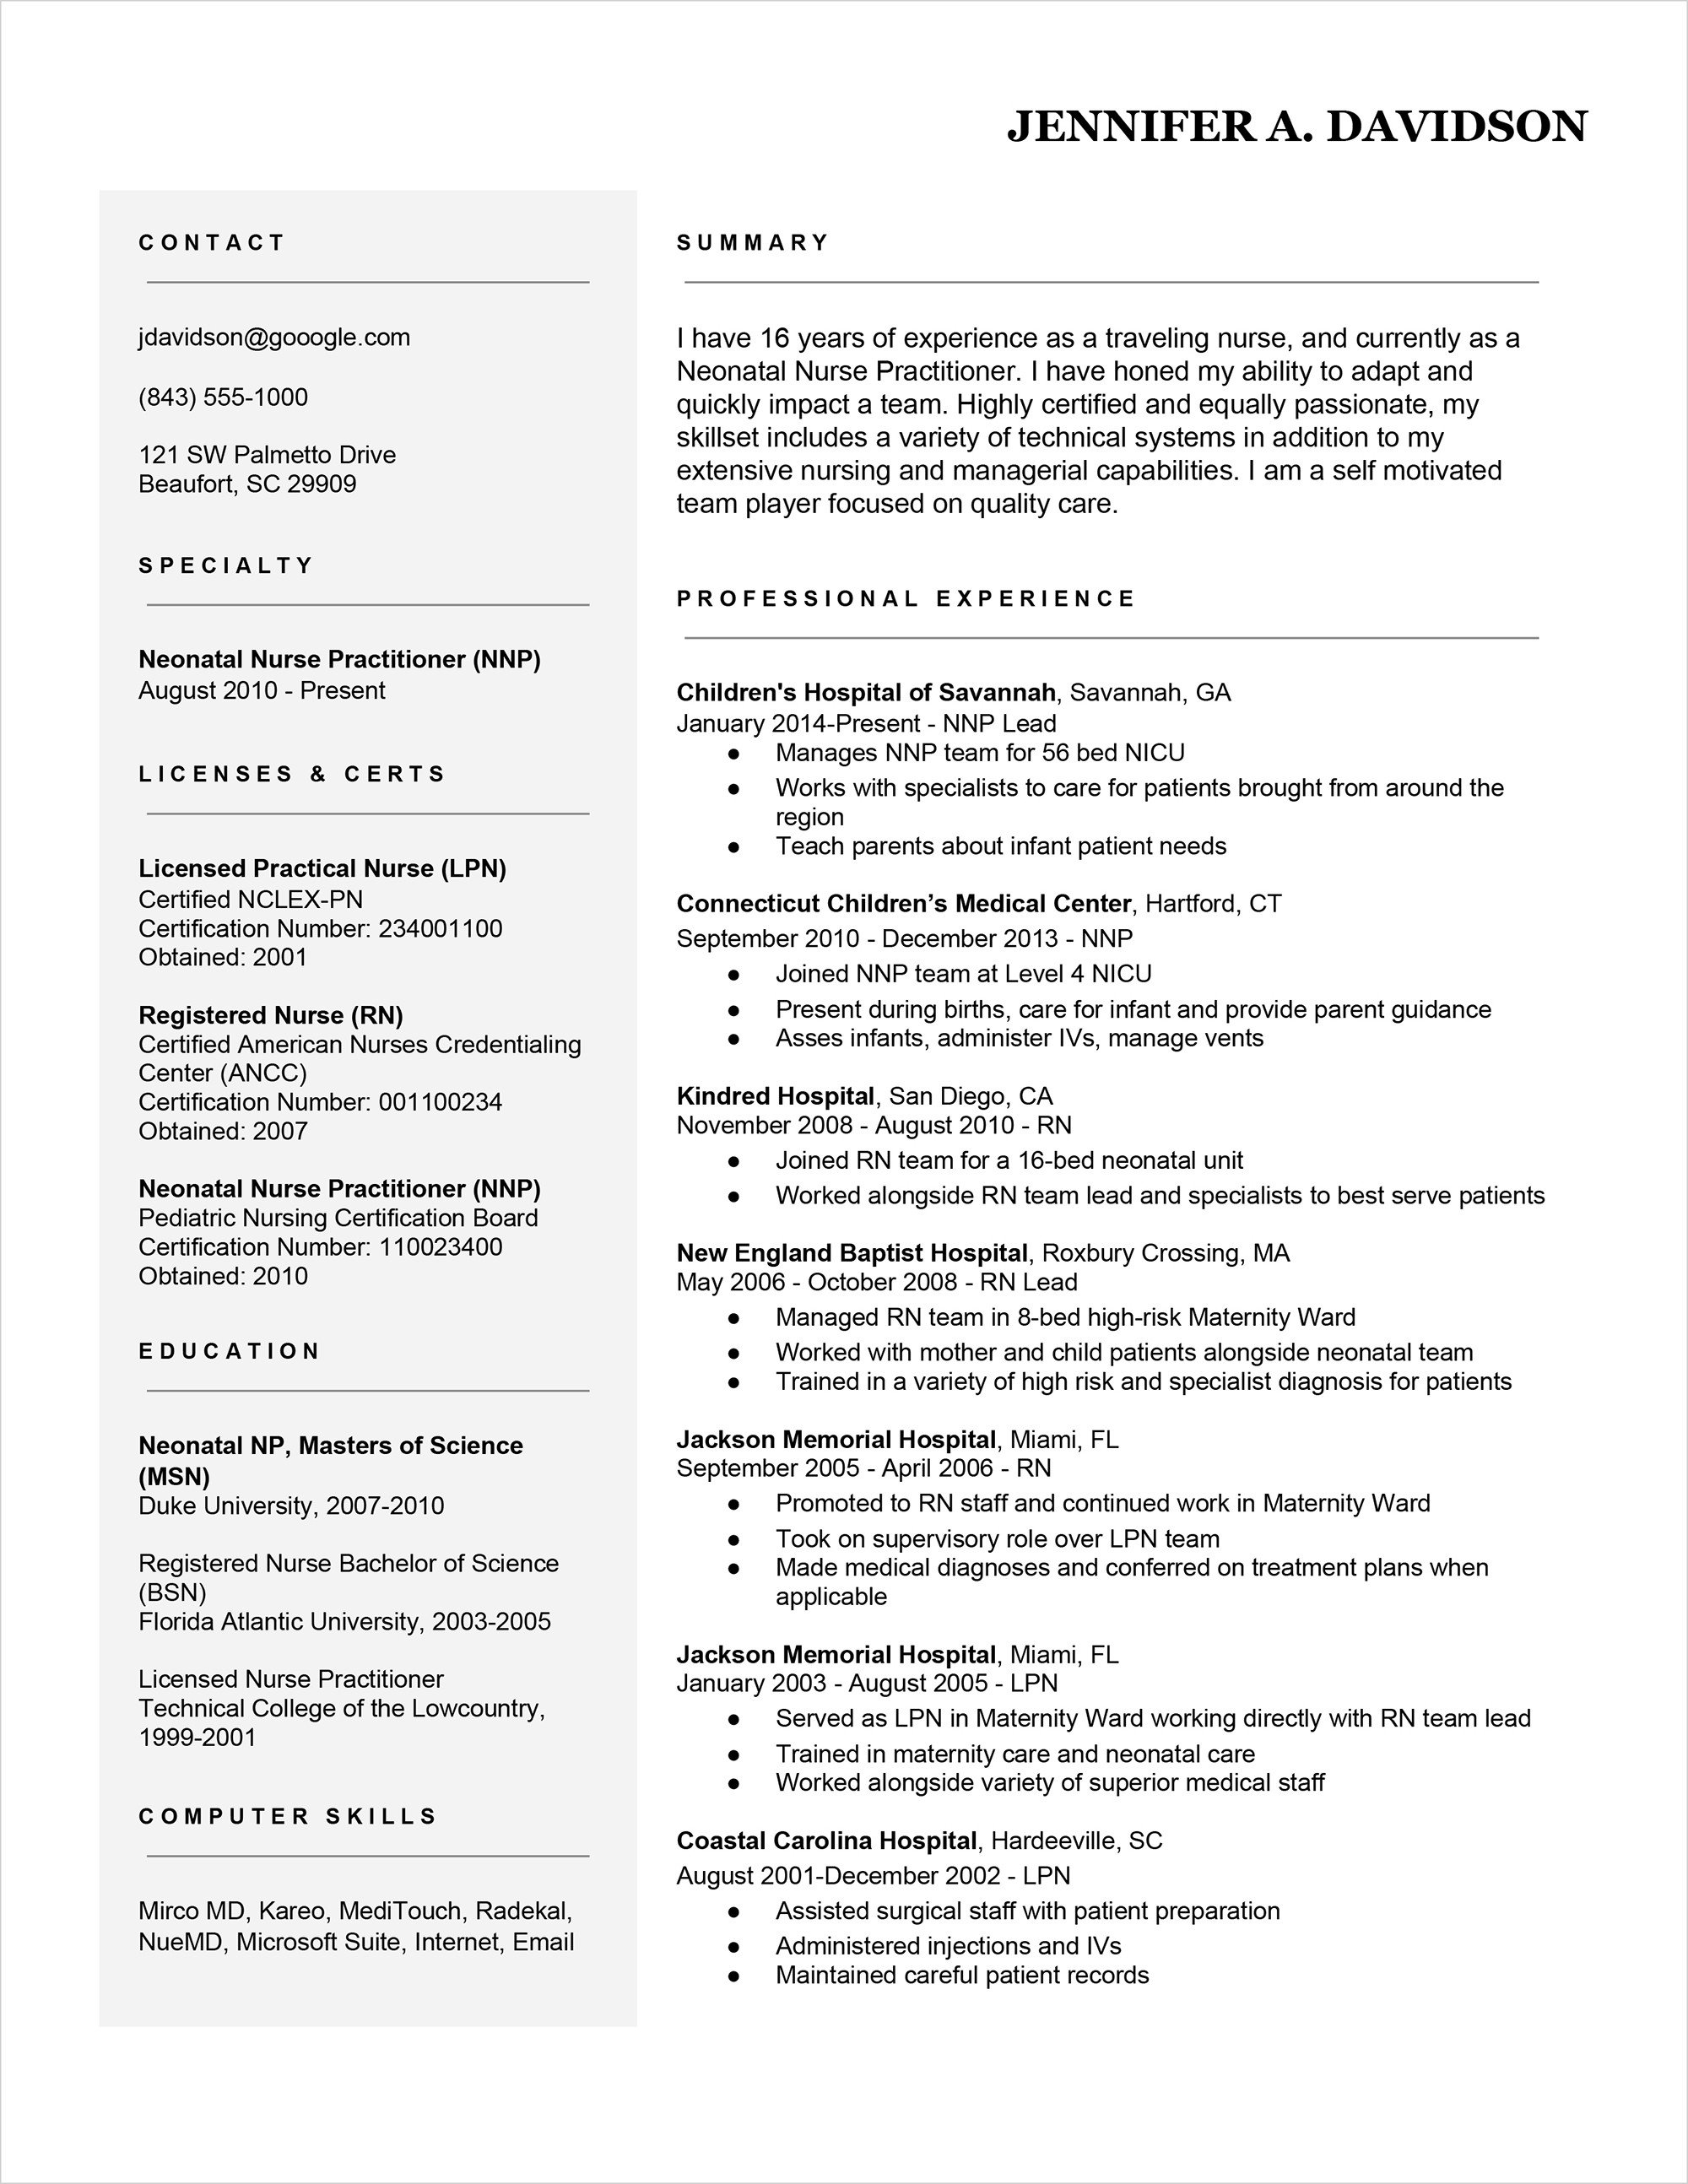 Resume Template for Nursing Travel Nurse Resume Examples 7 Secrets for Standing Out